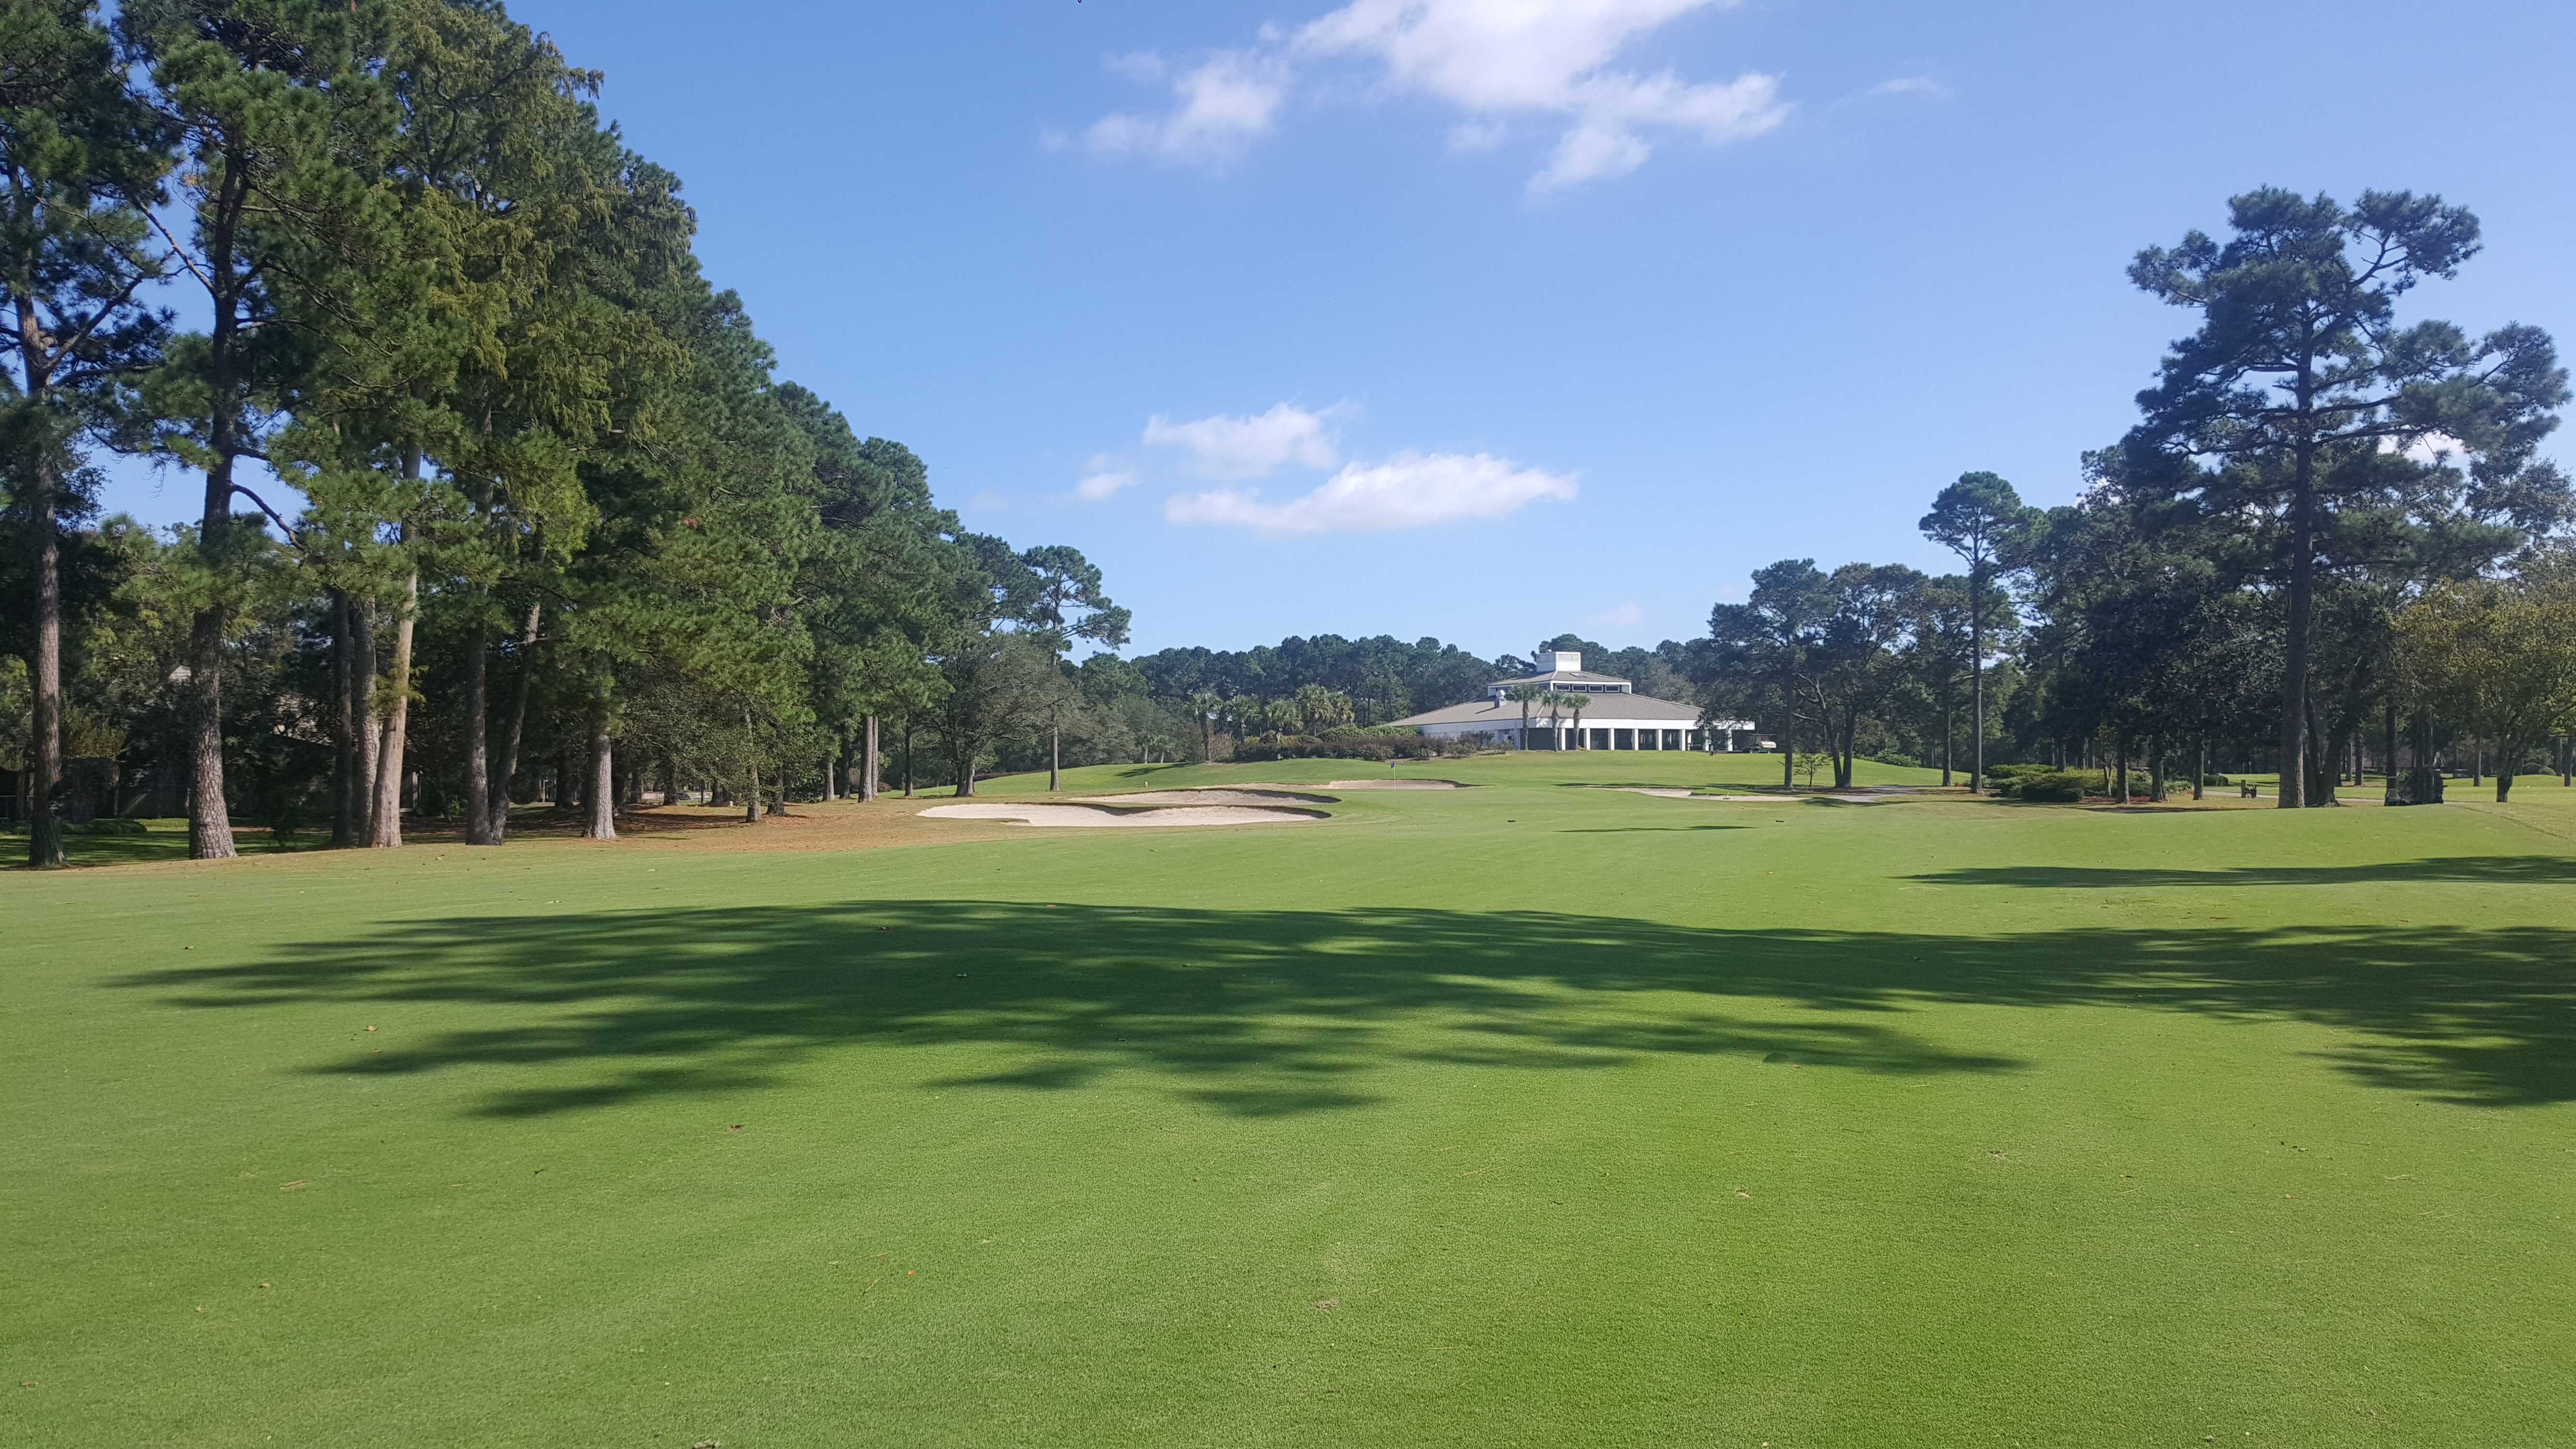 The 9th Hole at River Club in Pawleys Island